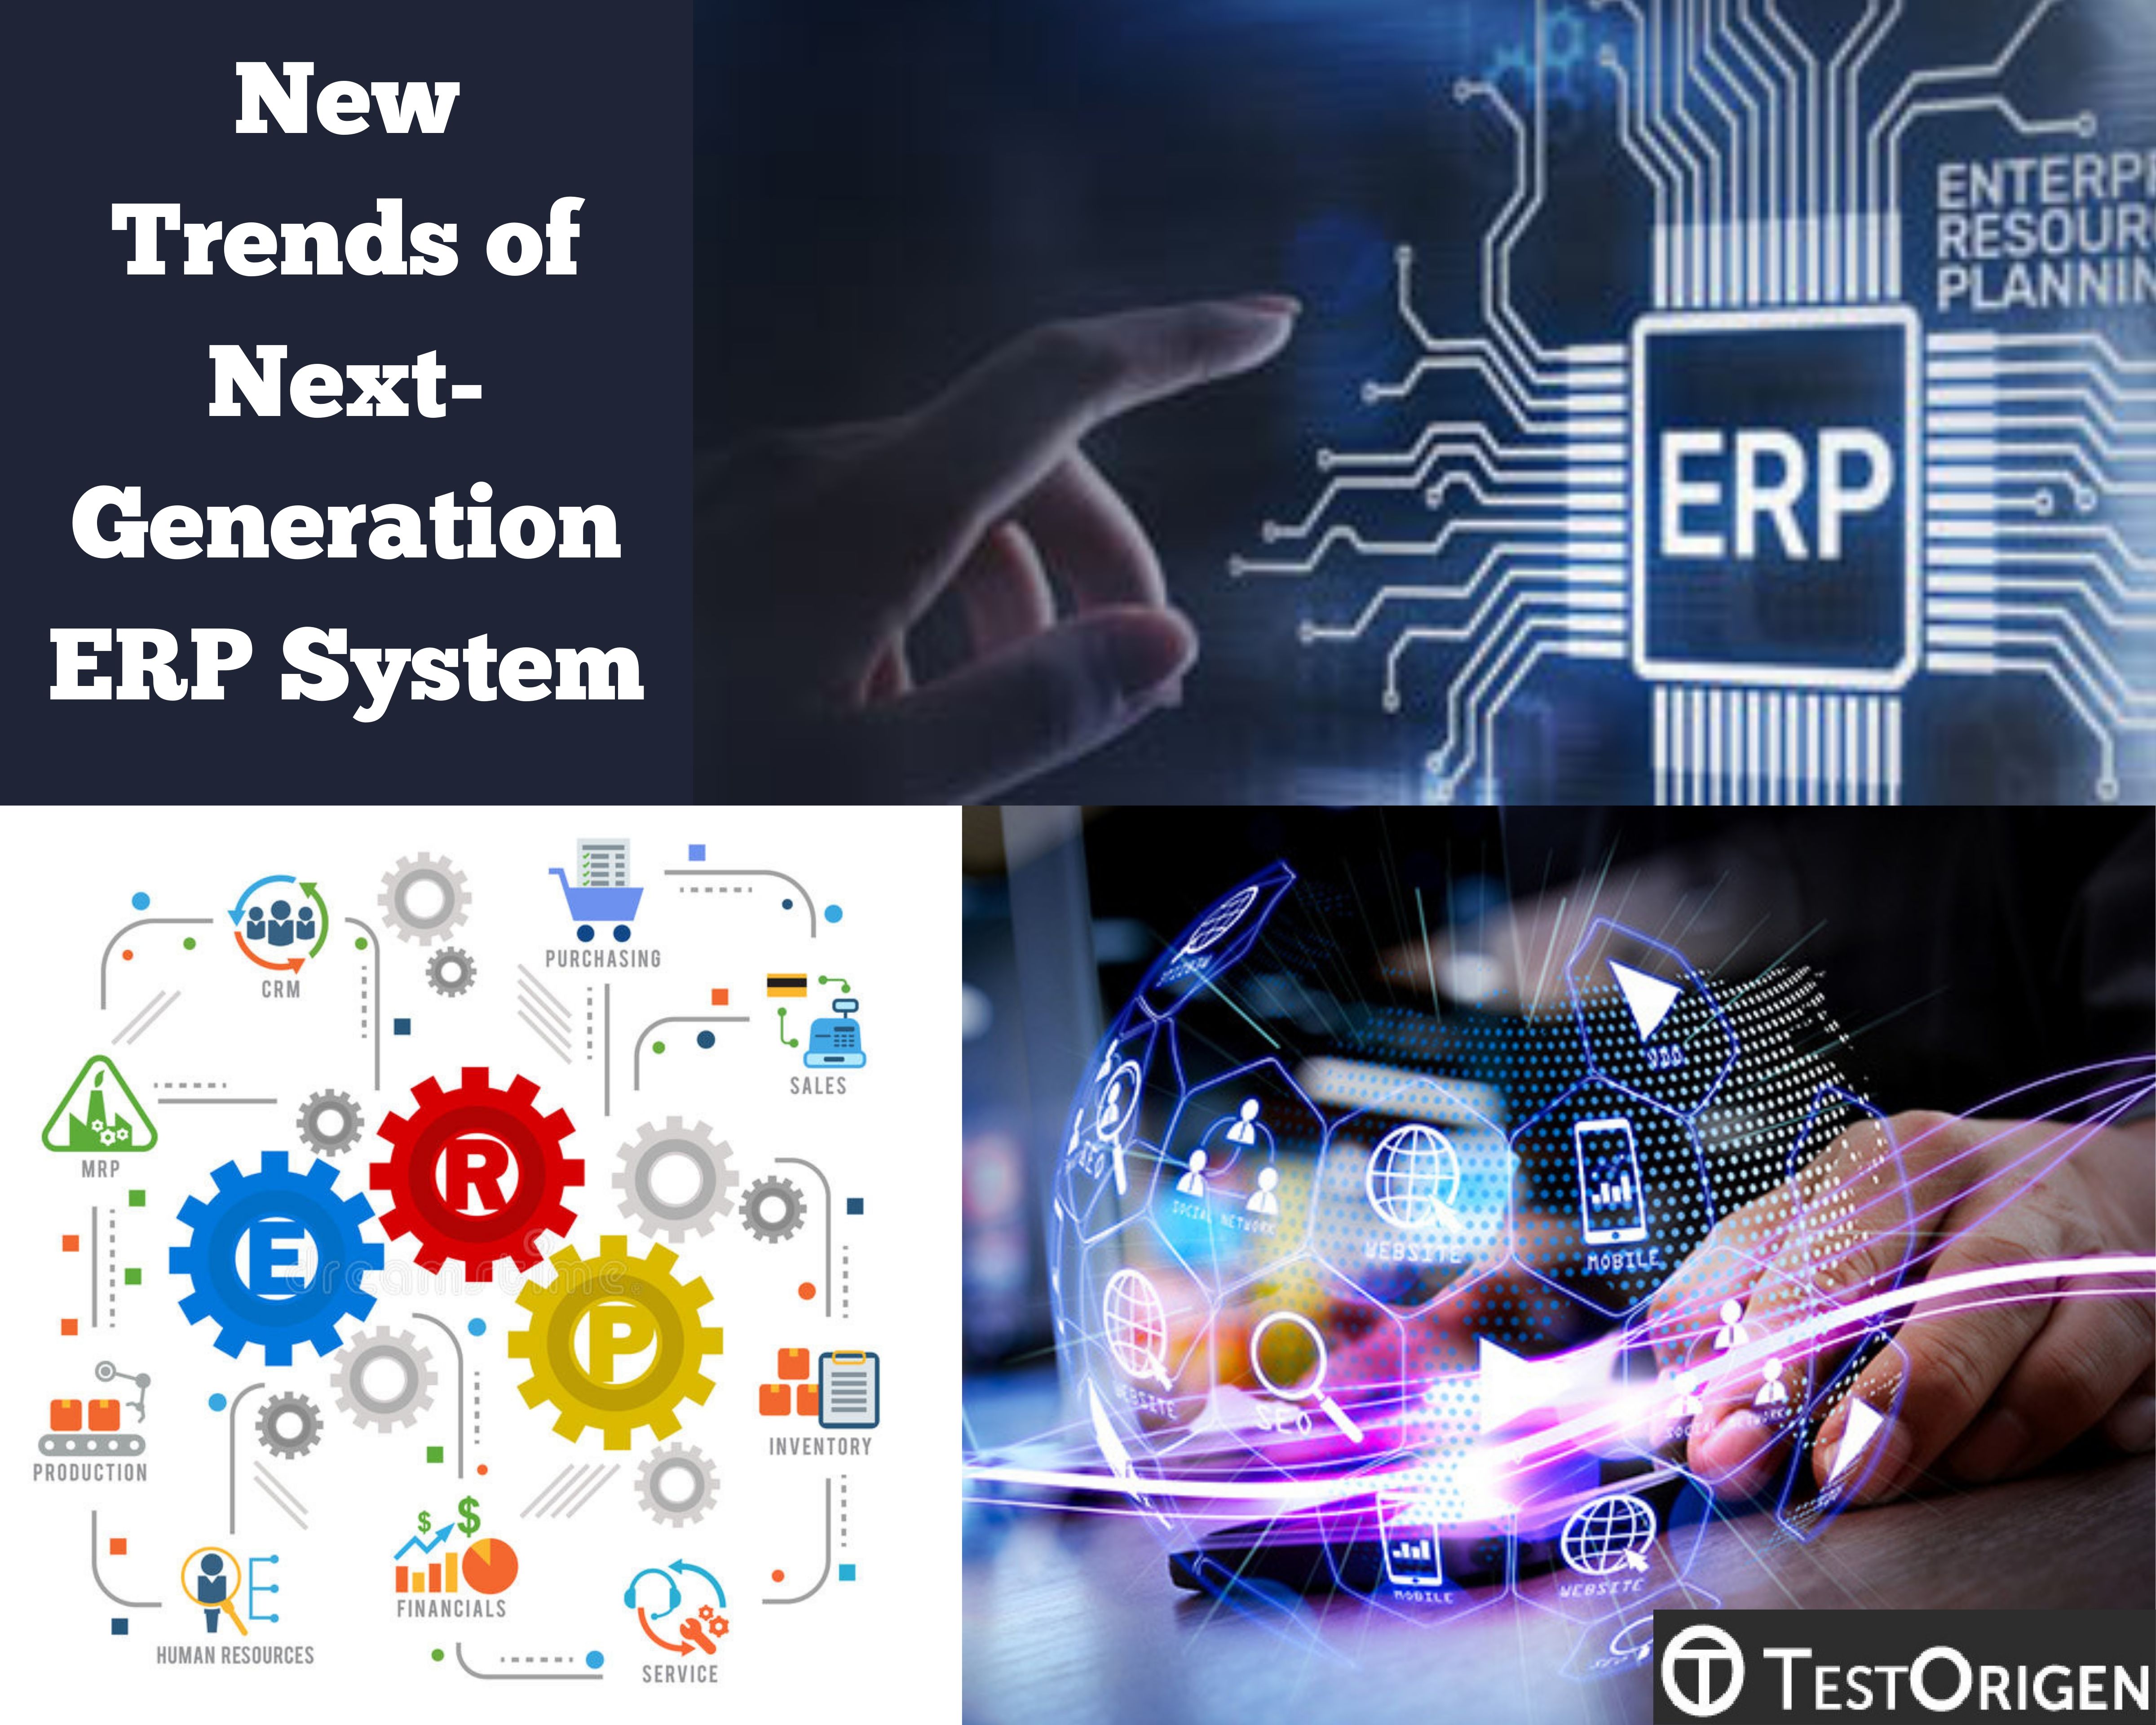 New Trends of Next-Generation ERP System